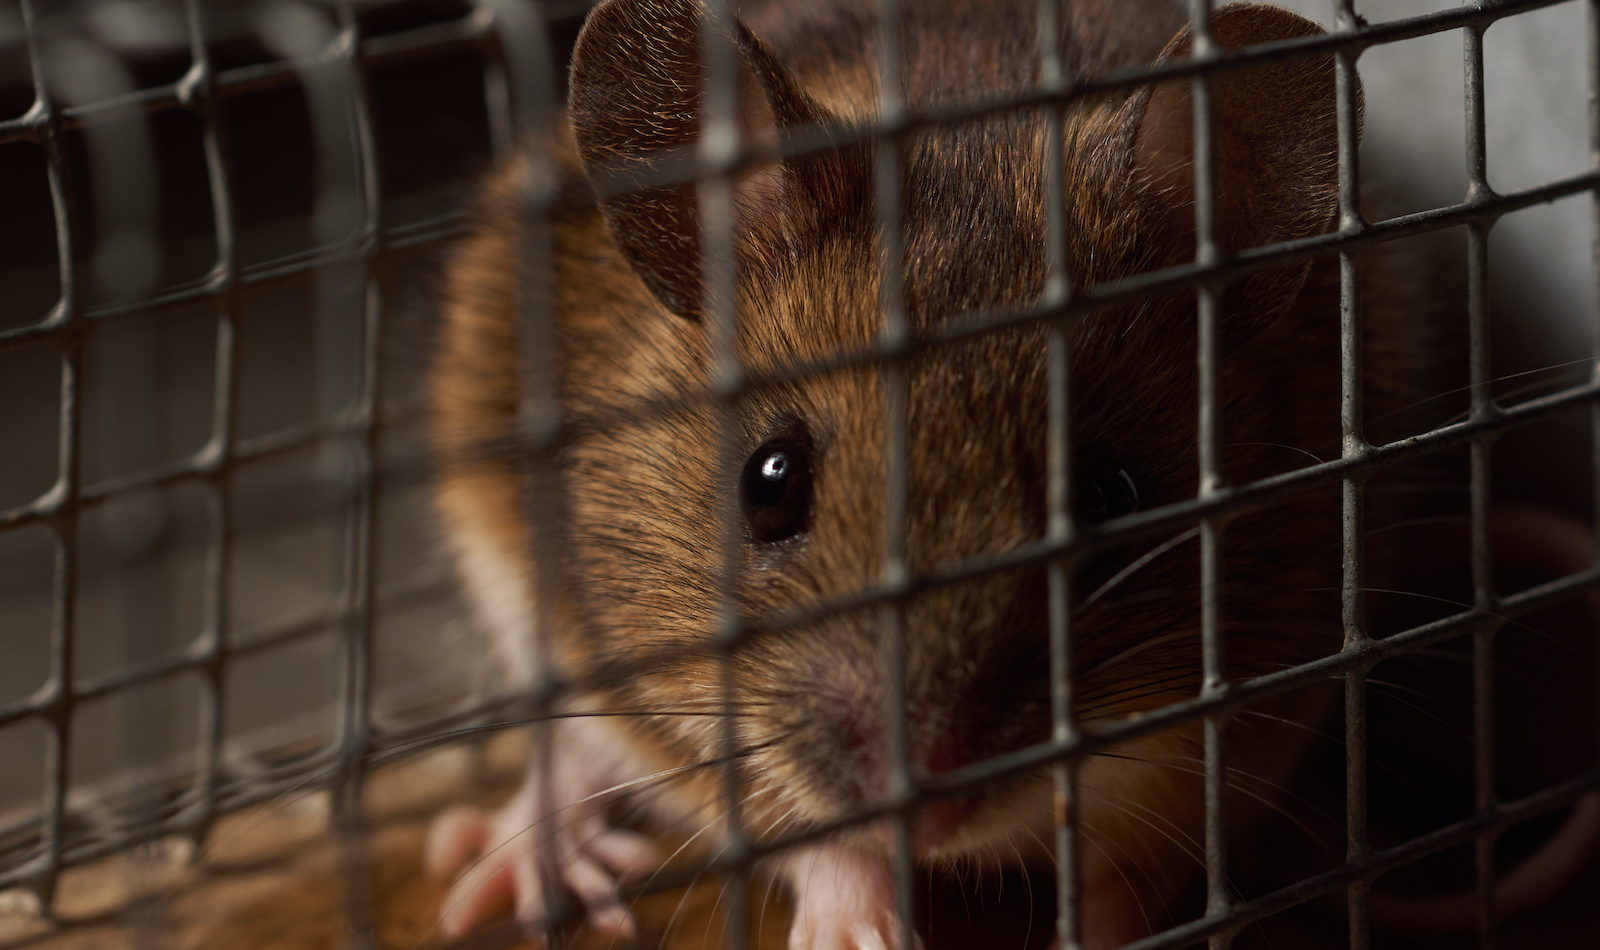 A mouse behind wire mesh.